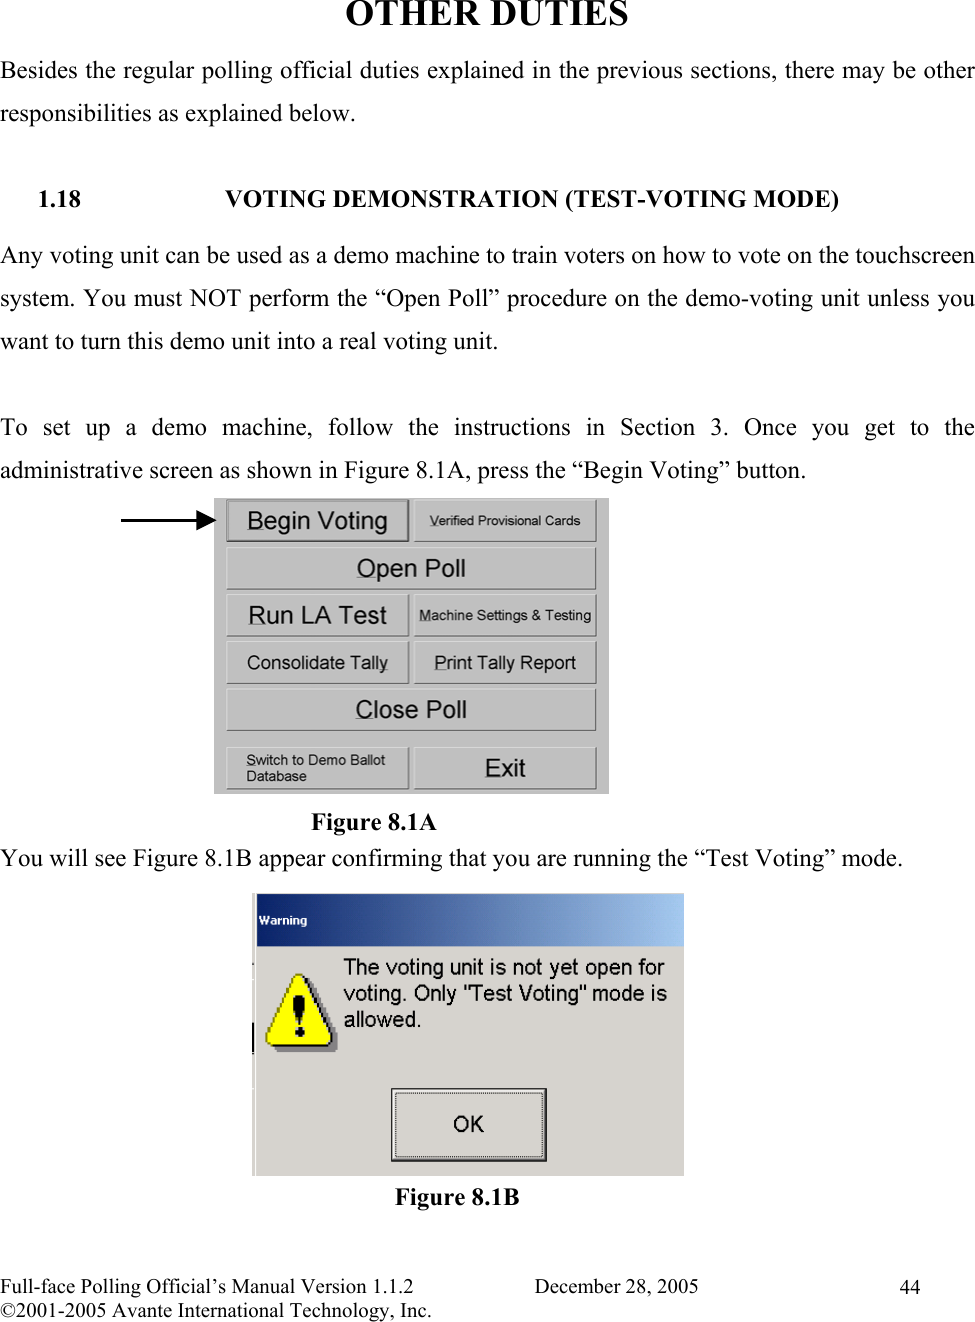    Full-face Polling Official’s Manual Version 1.1.2                       December 28, 2005 ©2001-2005 Avante International Technology, Inc.   44 OTHER DUTIES Besides the regular polling official duties explained in the previous sections, there may be other responsibilities as explained below.  1.18 VOTING DEMONSTRATION (TEST-VOTING MODE) Any voting unit can be used as a demo machine to train voters on how to vote on the touchscreen system. You must NOT perform the “Open Poll” procedure on the demo-voting unit unless you want to turn this demo unit into a real voting unit.  To set up a demo machine, follow the instructions in Section 3. Once you get to the administrative screen as shown in Figure 8.1A, press the “Begin Voting” button.           You will see Figure 8.1B appear confirming that you are running the “Test Voting” mode.           Figure 8.1BFigure 8.1A 